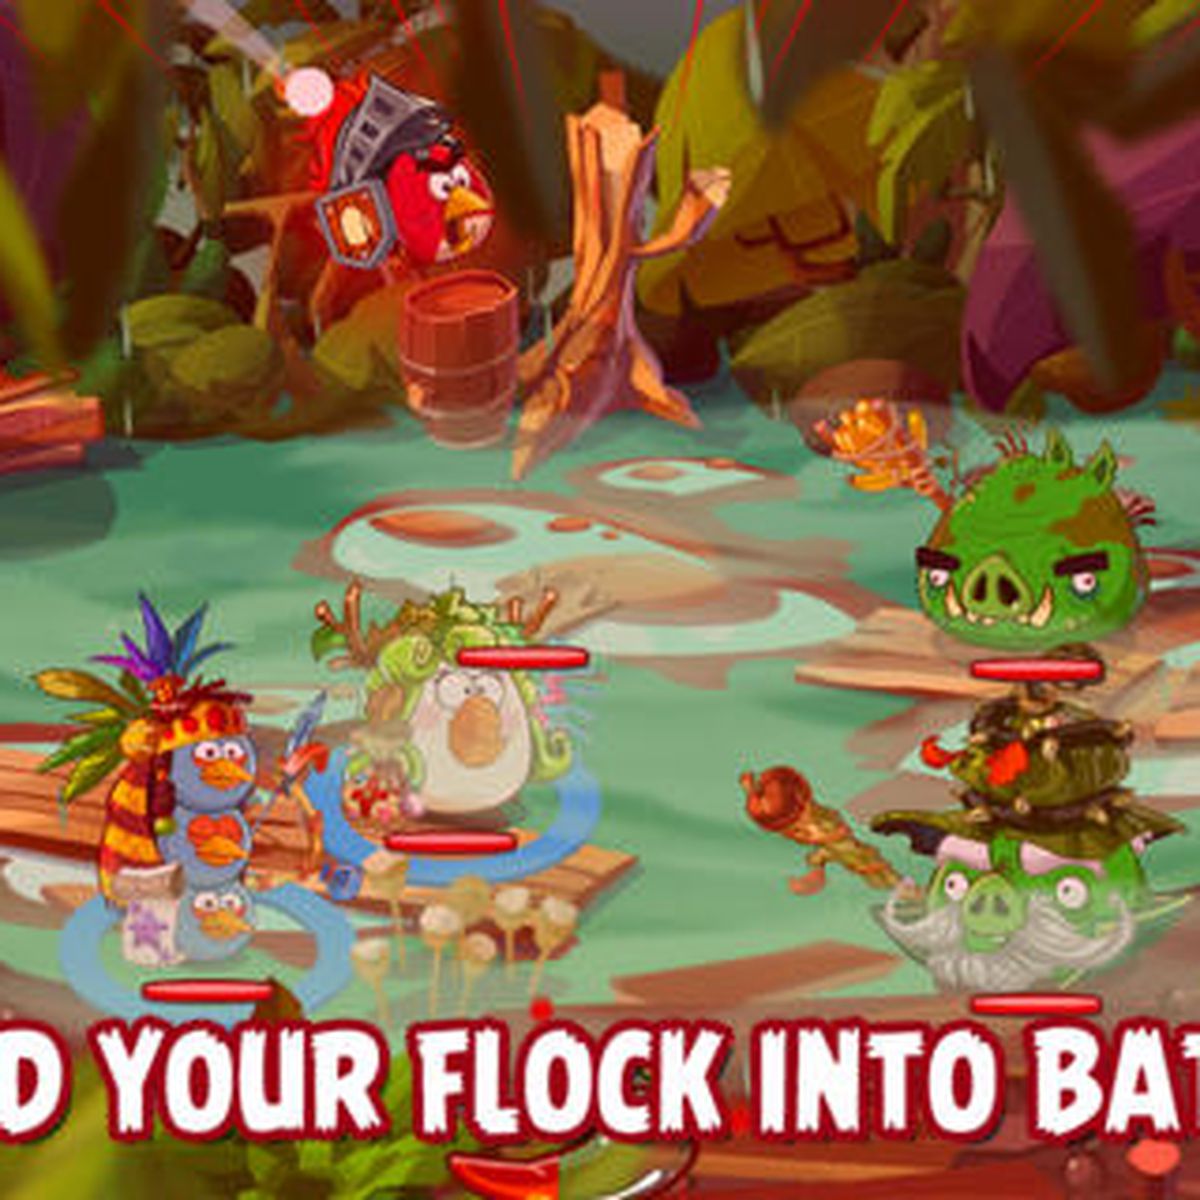 angry birds epic hack on FlowVella - Presentation Software for Mac iPad and  iPhone